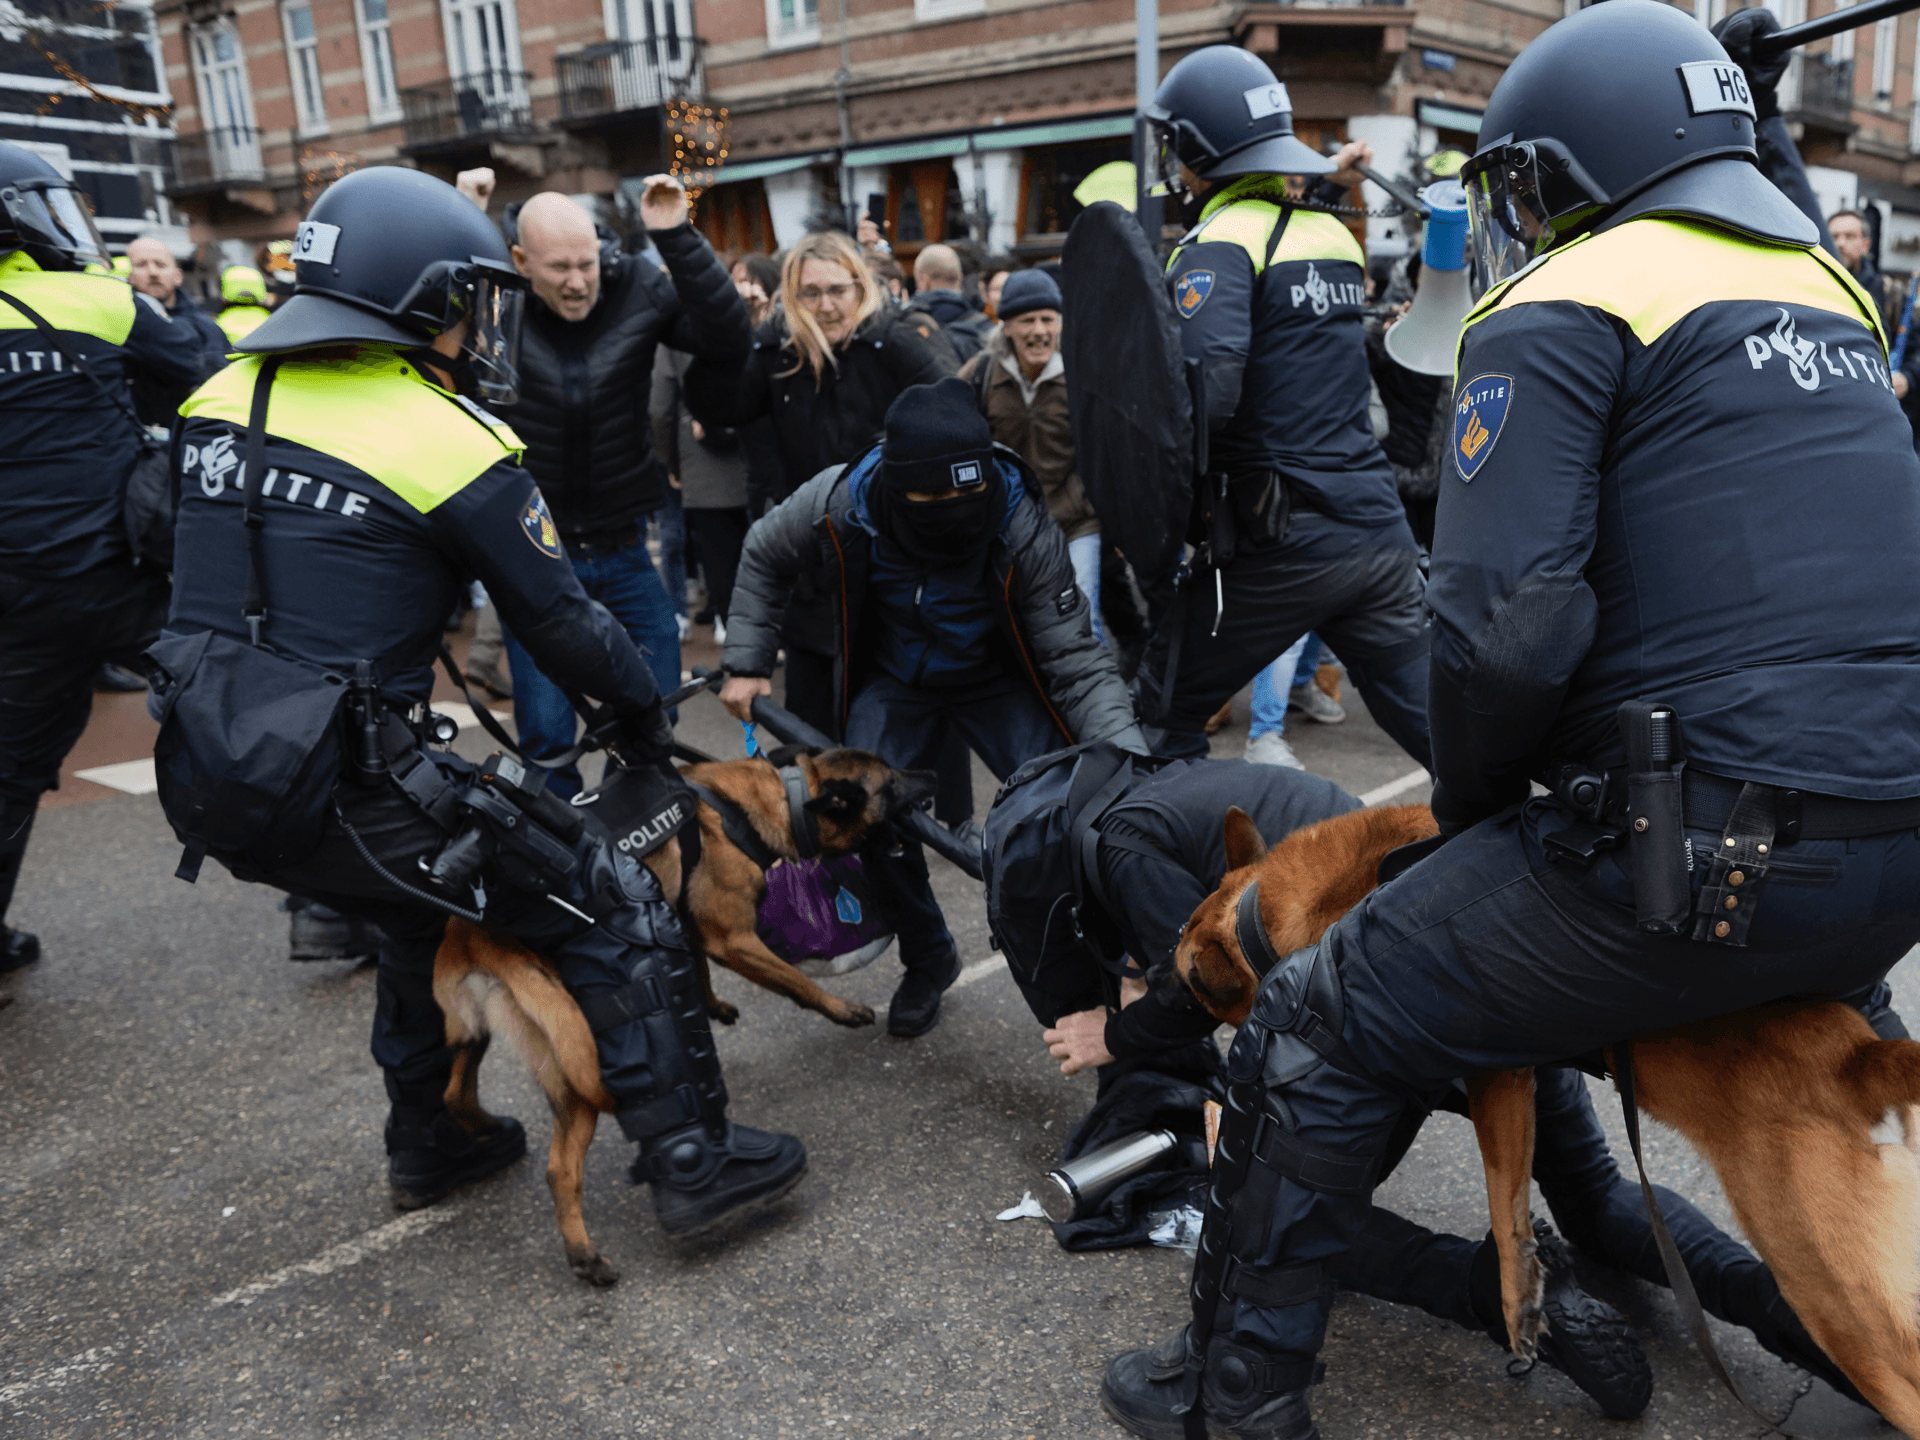 AMSTERDAM, NETHERLANDS - JANUARY 02: Clashes erupt between police anti-riot officers and antivaxxers affiliated to far-right parties near Museumplein on January 2, 2022 in Amsterdam, Netherlands. With riot police expected to be on strike, authorities hav banned the Covid-19 lockdown protest in the Dutch capital. The postponed police protest is part of a series of strikes by police union members to draw attention to police capacity problems and conditions of work. (Photo by Pierre Crom/Getty Images)